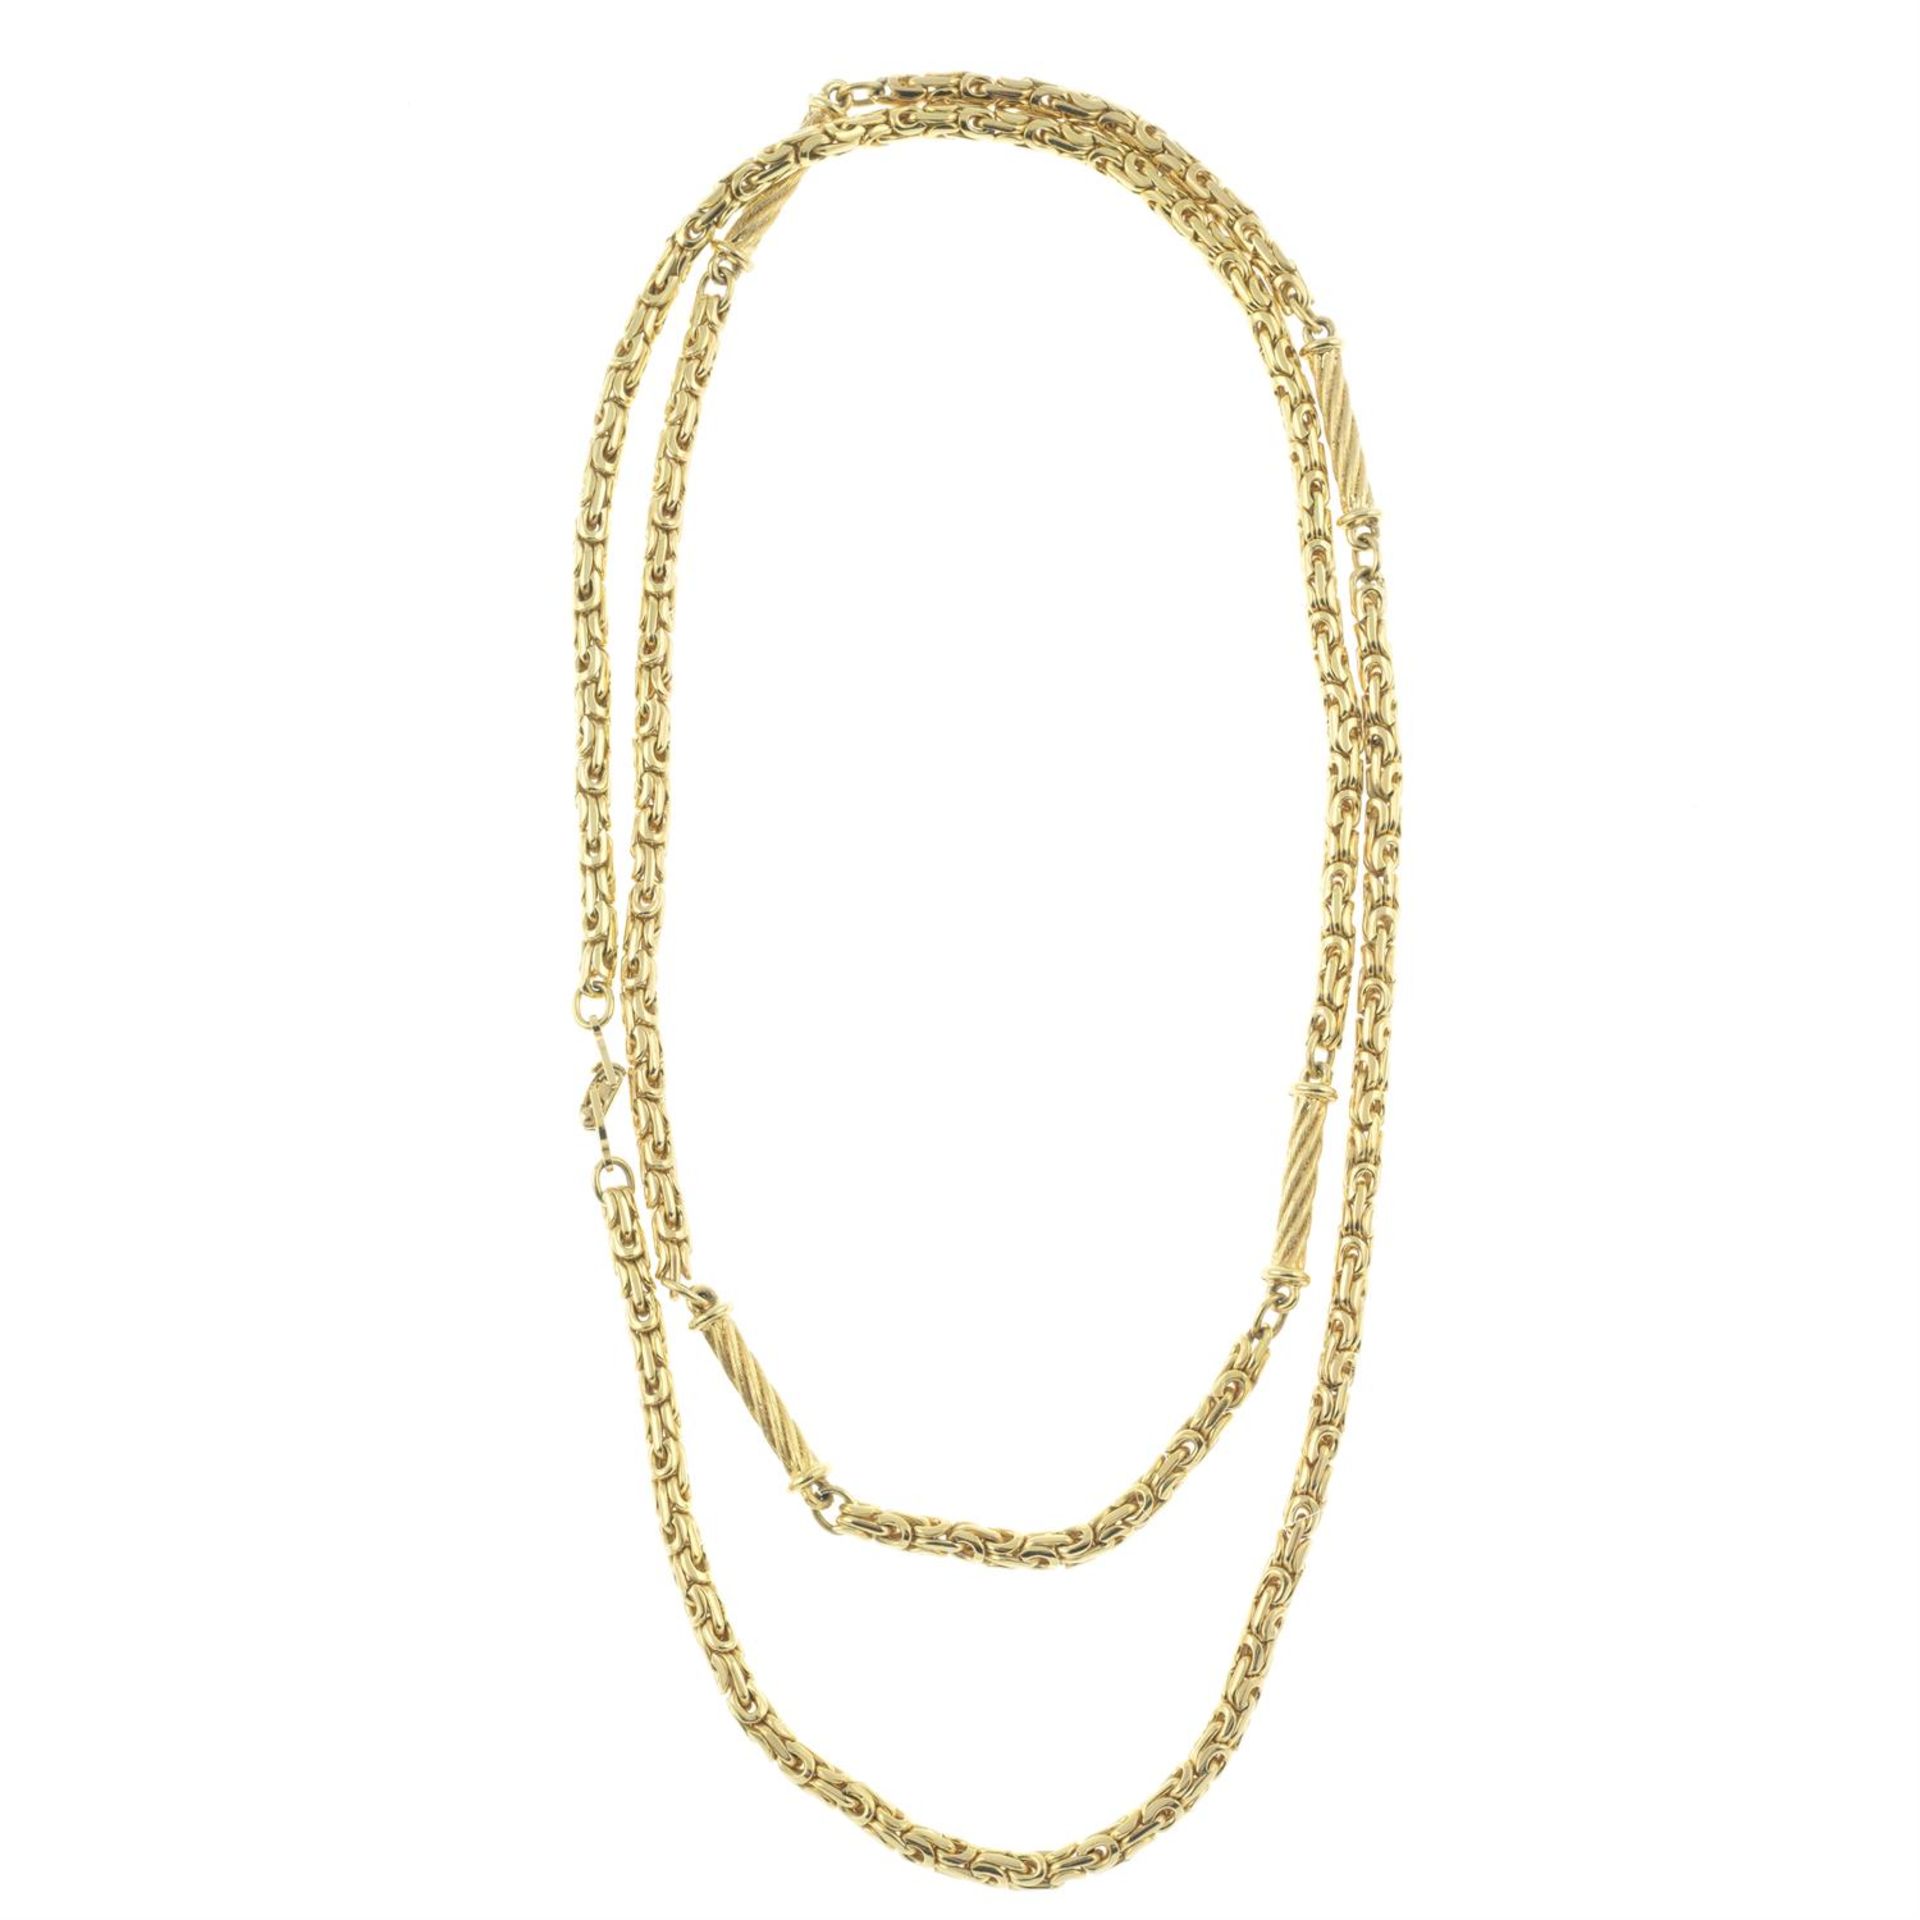 CHRISTIAN DIOR- a gold-tone necklace.